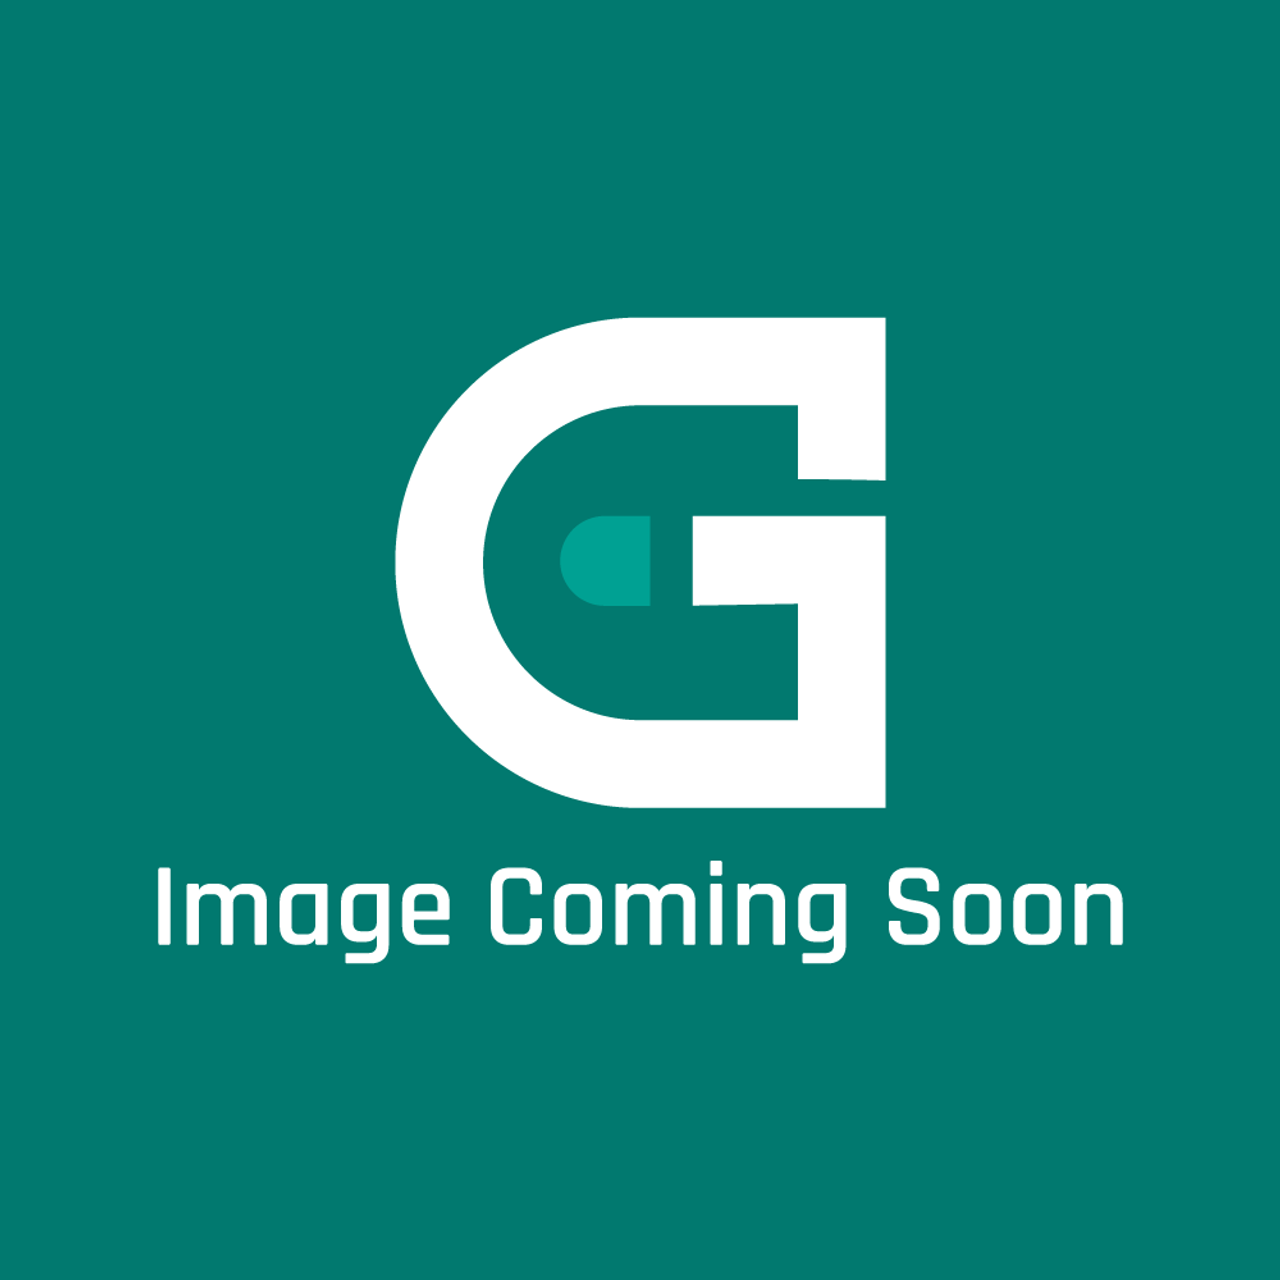 Garland G01818-1 - Element 208V, 4Kw - Image Coming Soon!